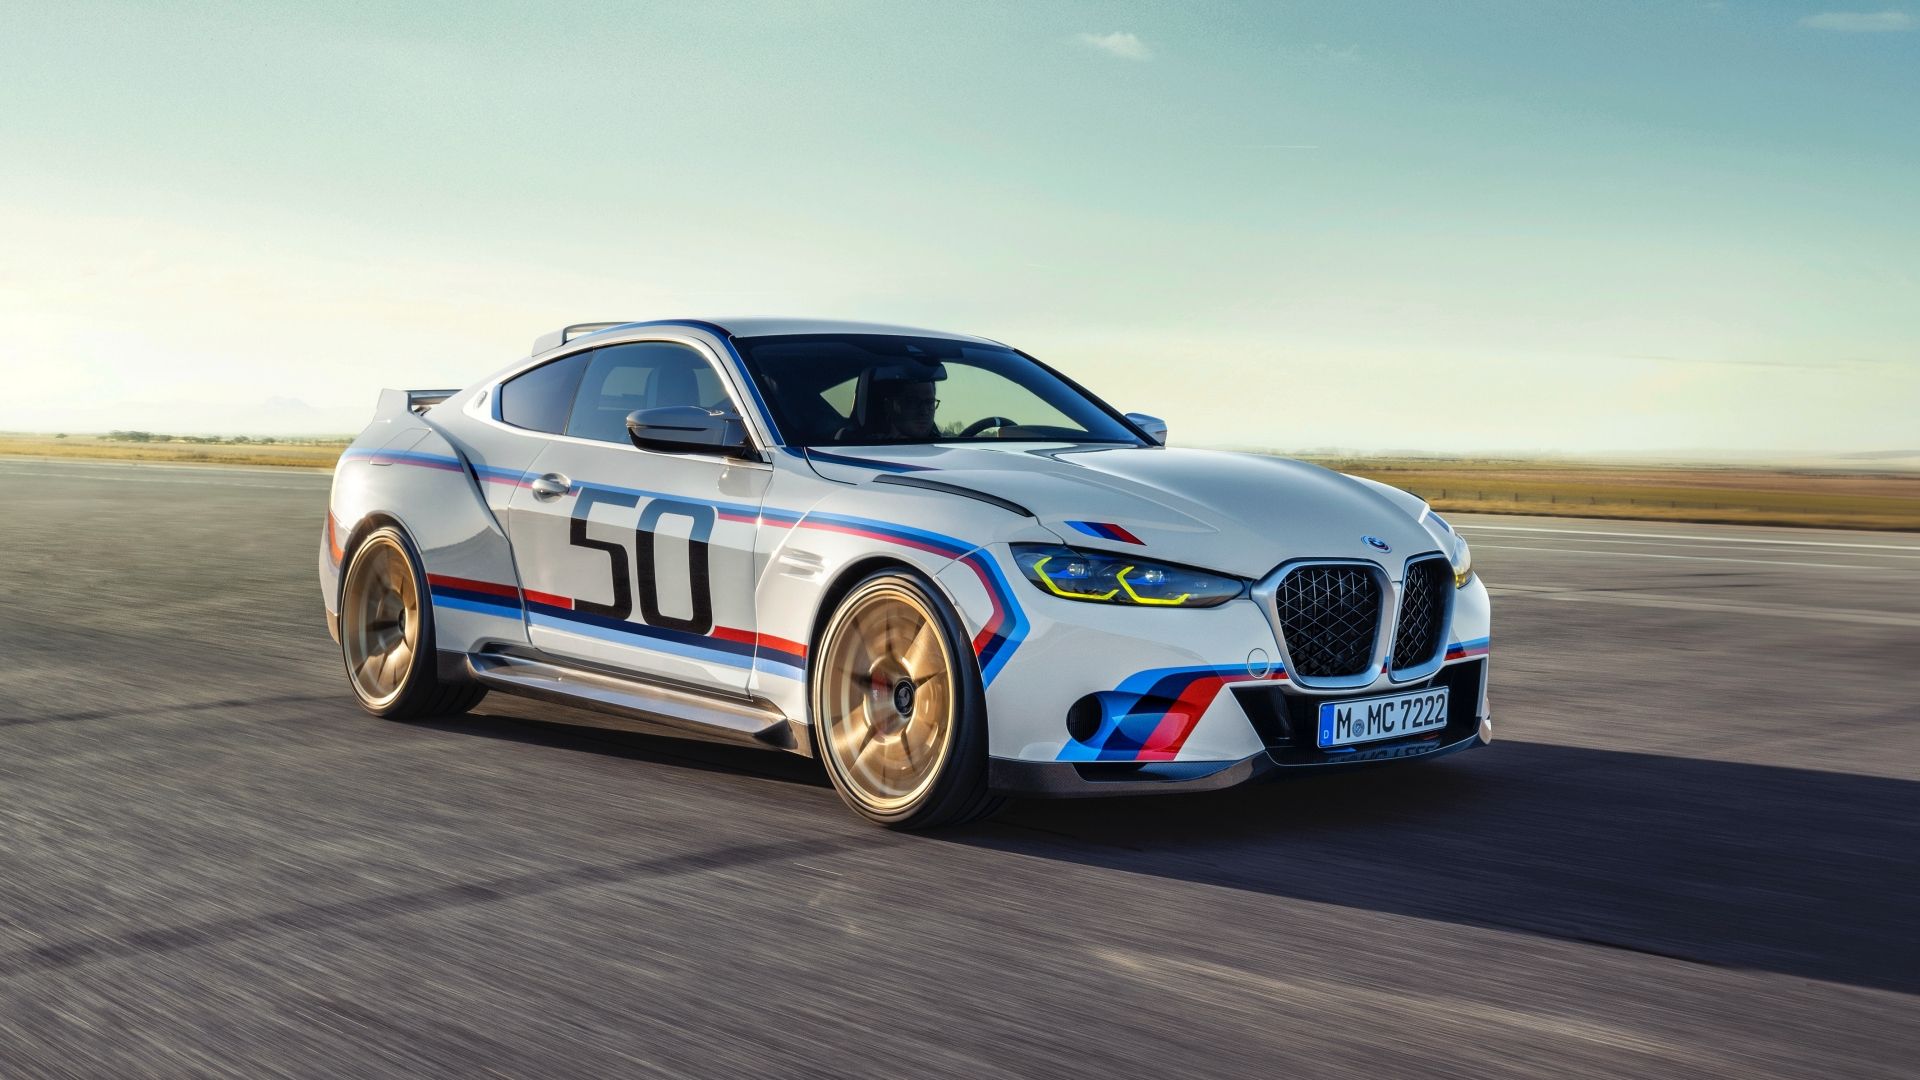 The BMW M3 Gets Bonkers Colors to Celebrate the M's 50th